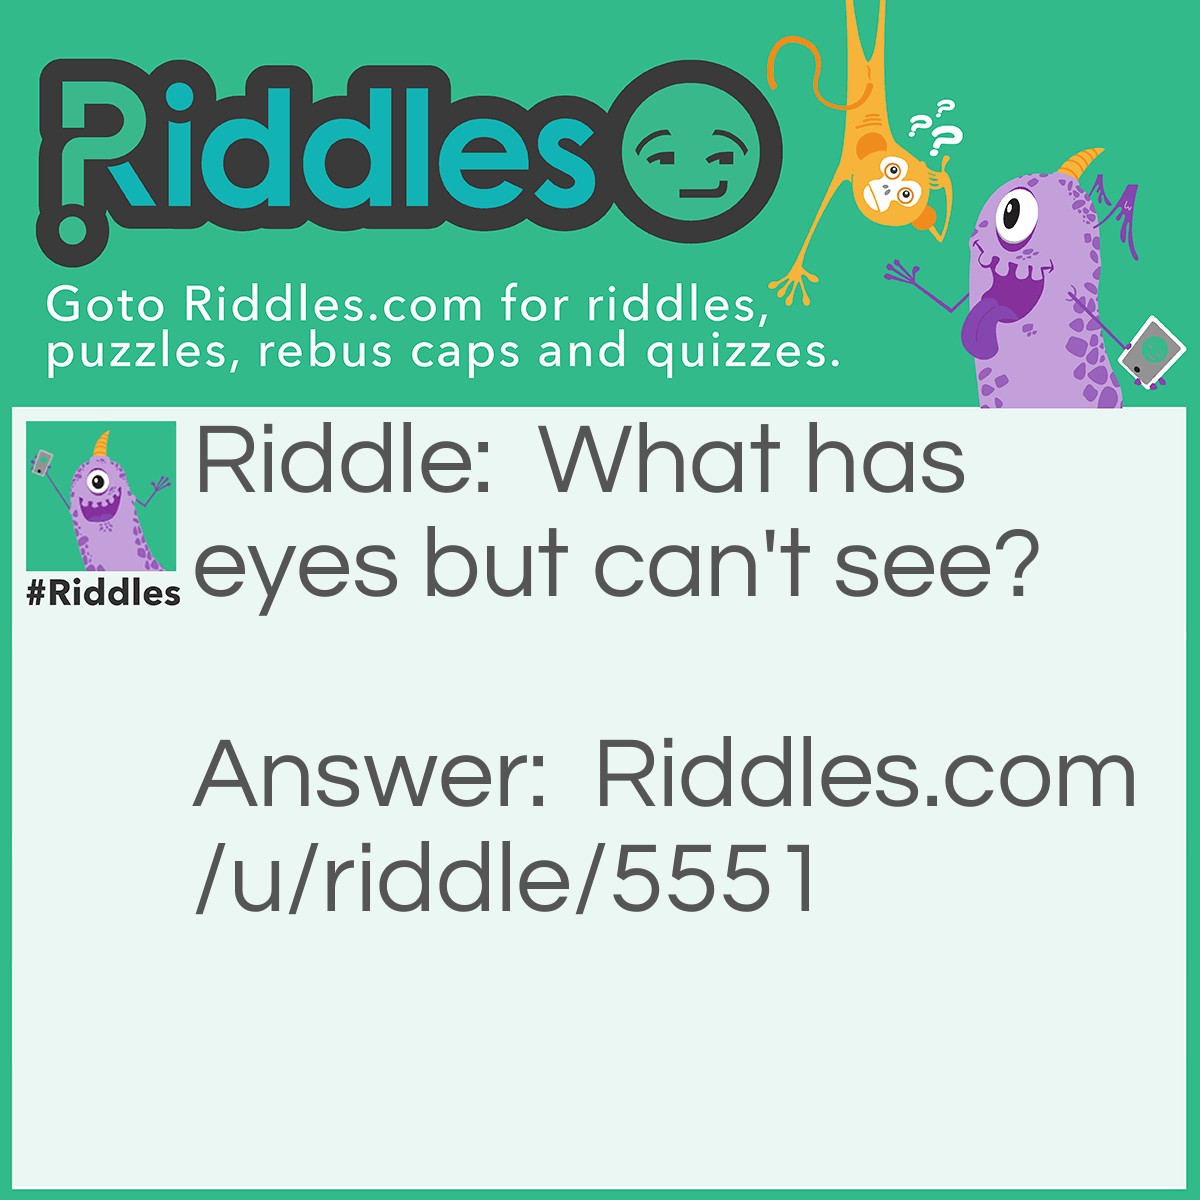 Riddle: What has eyes but can't see? Answer: A blind person.